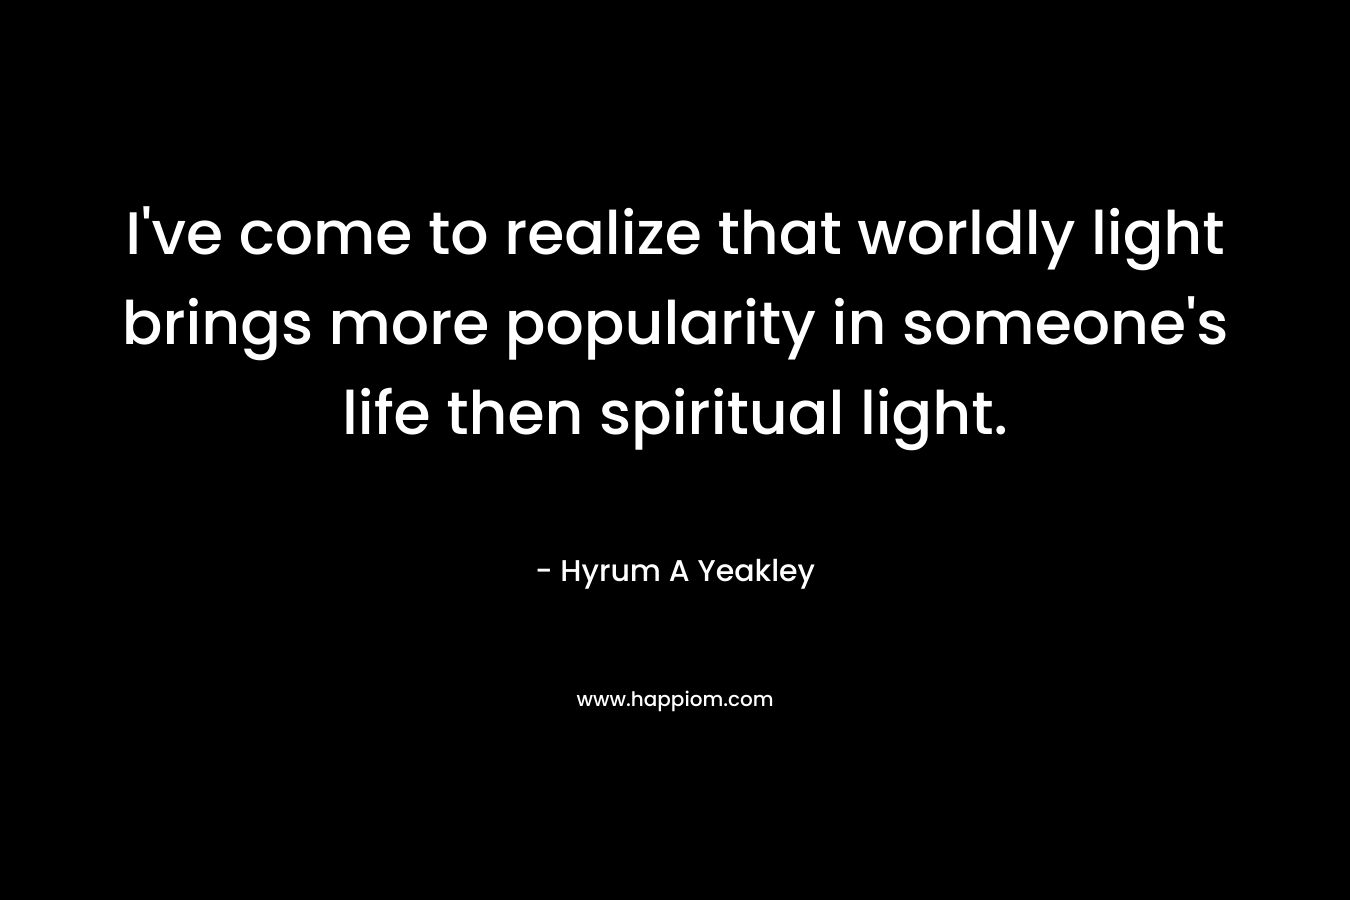 I've come to realize that worldly light brings more popularity in someone's life then spiritual light.